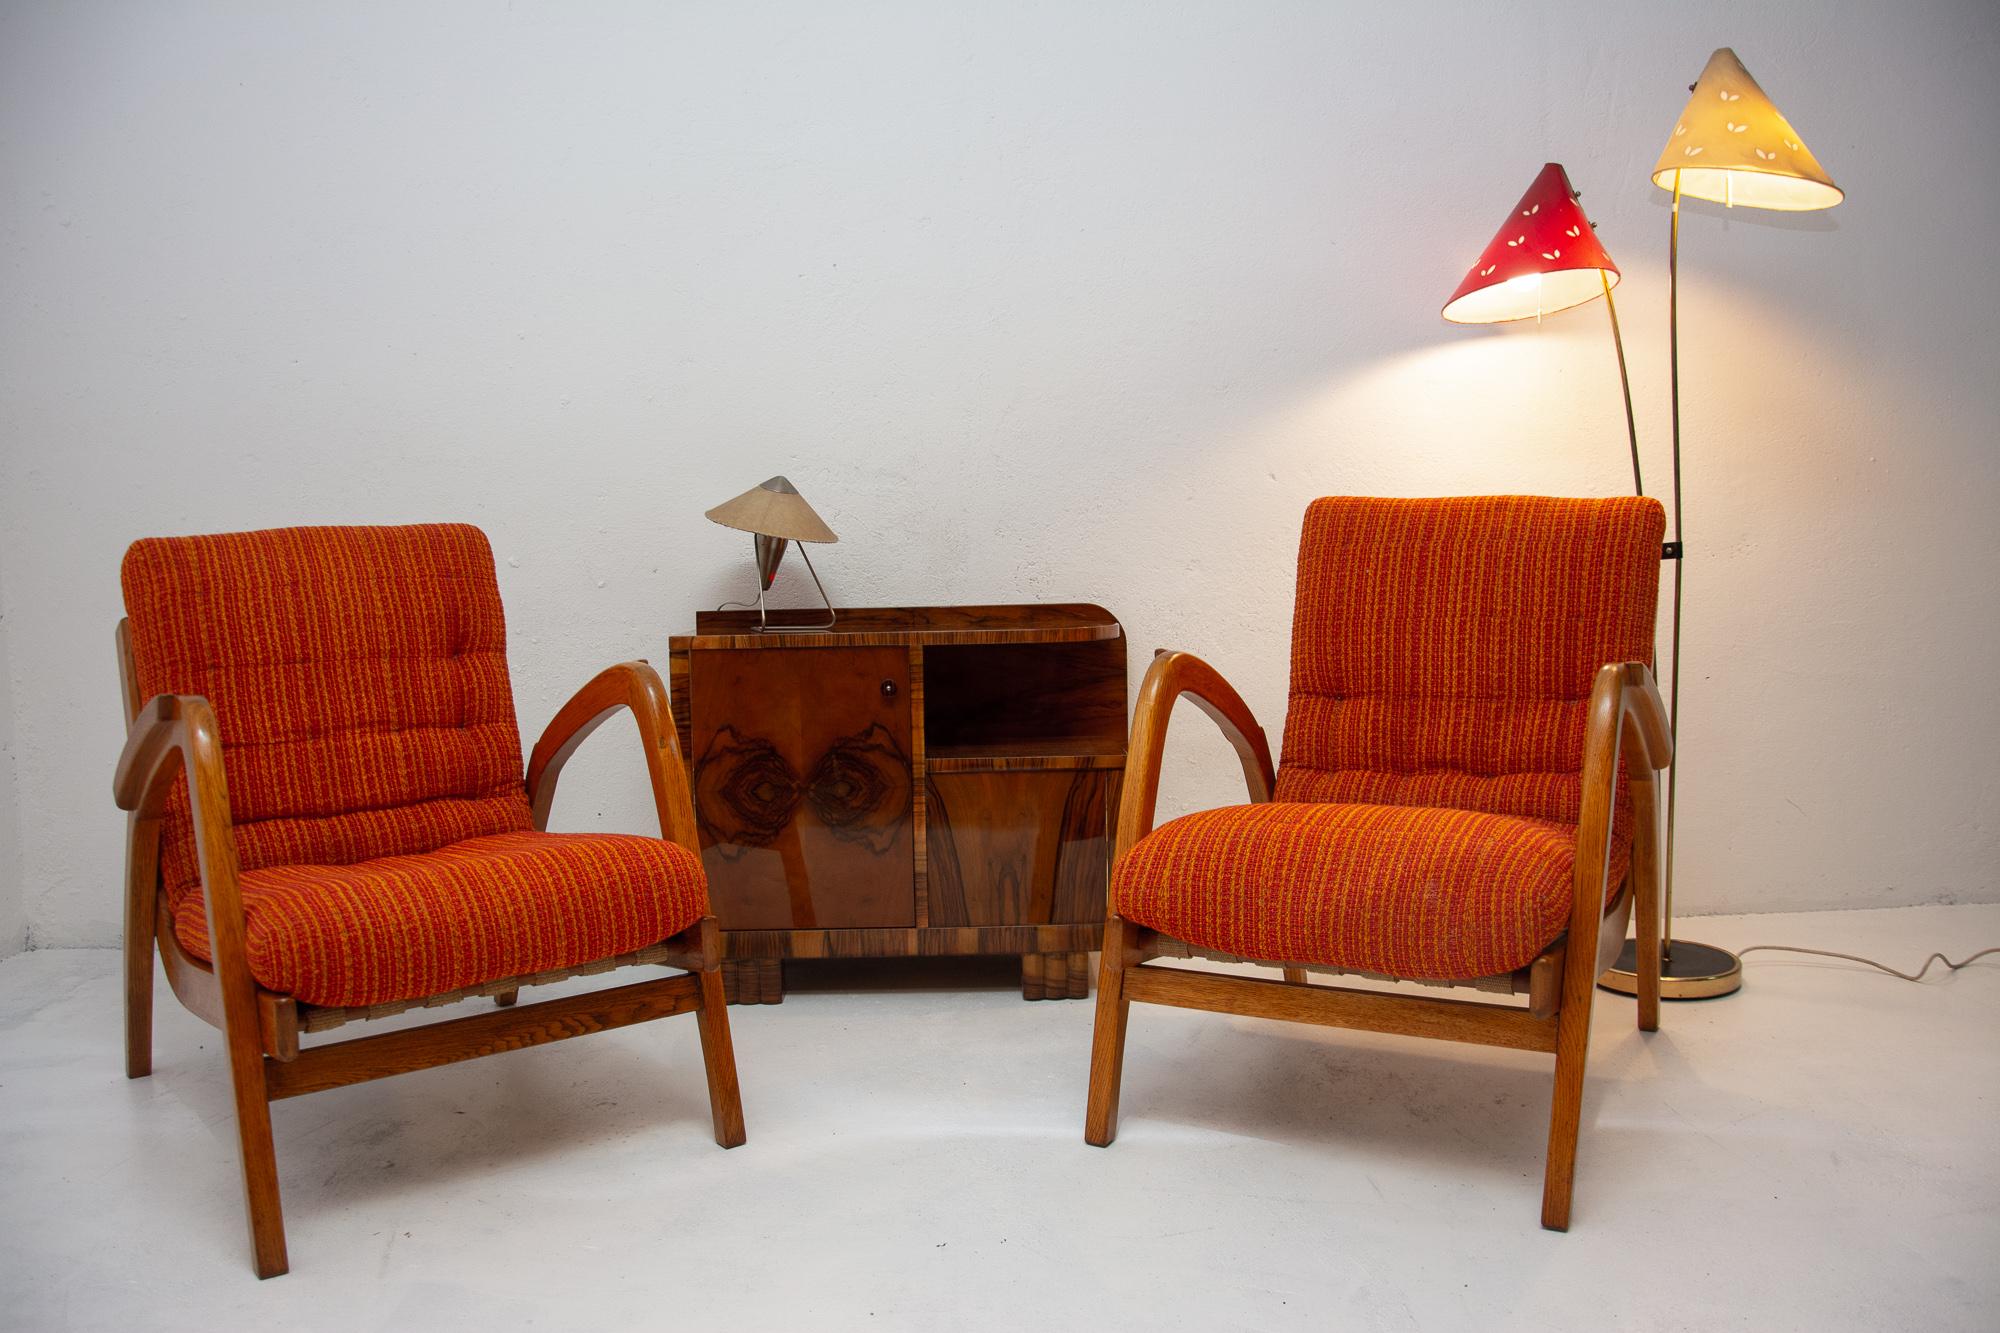 A pair of bentwood armchairs in beech, designed by Jan Vanek for Krasná Jizba in the 1940´s.
It features a woven canvas seat and beech bent wooden frame. The wood is fully restored. The cushions are removable and are in very good original